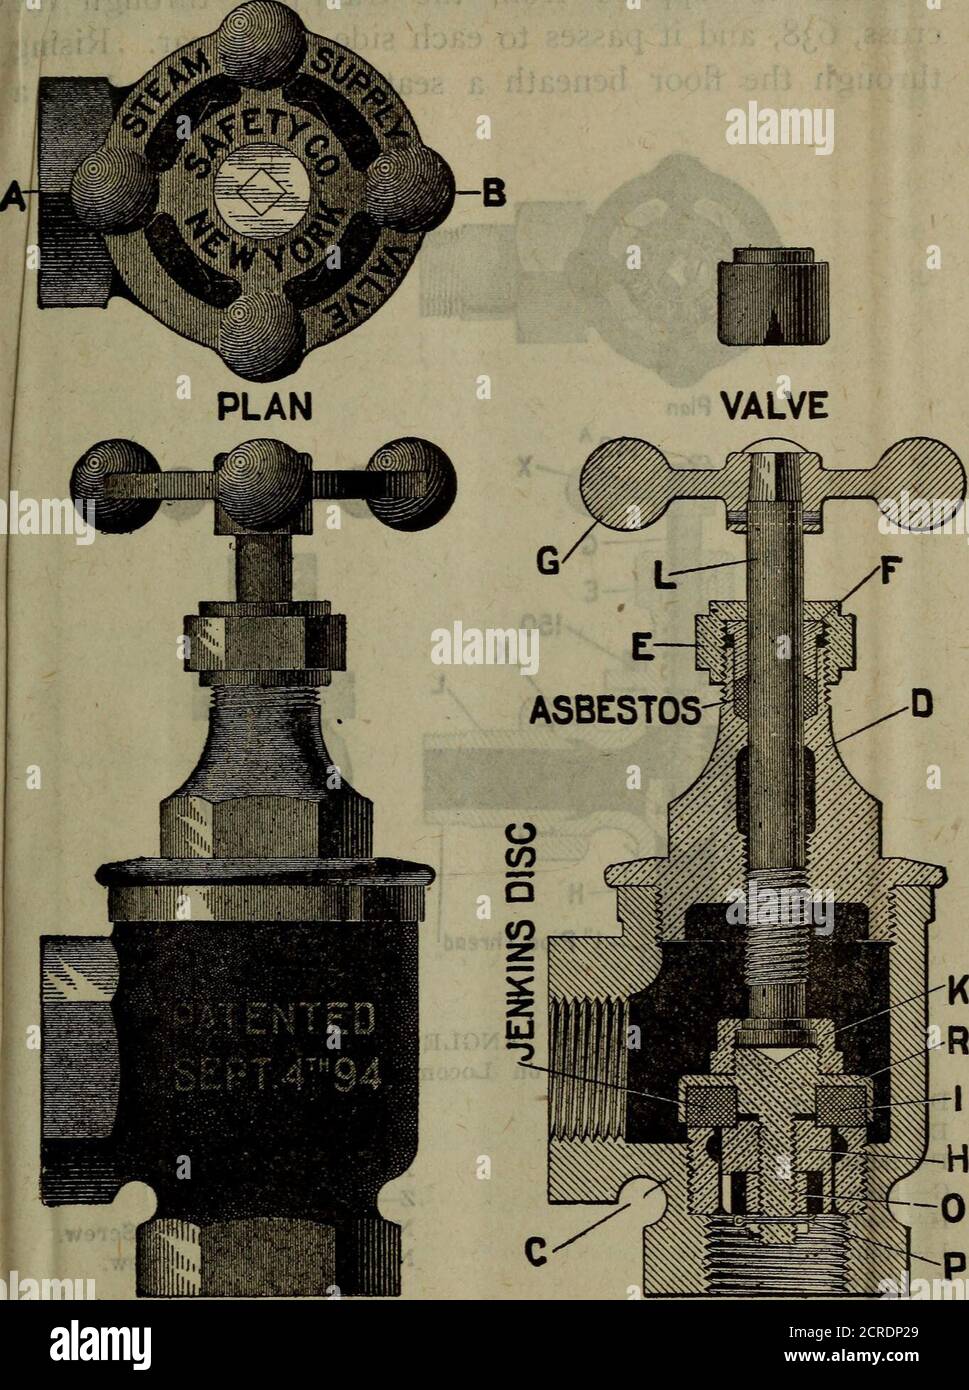 Dierentuin pond Overweldigend Operation of trains and station work and telegraphy . HEATING AND LIGHTING  CARS 67. C—Body.D—Bonnet. ELEVATION SECTION A B FIG 14. STEAM INLET VALVE.  LIST OF PARTS. F—Gliaml I—Disc, G—Hand Wheel.